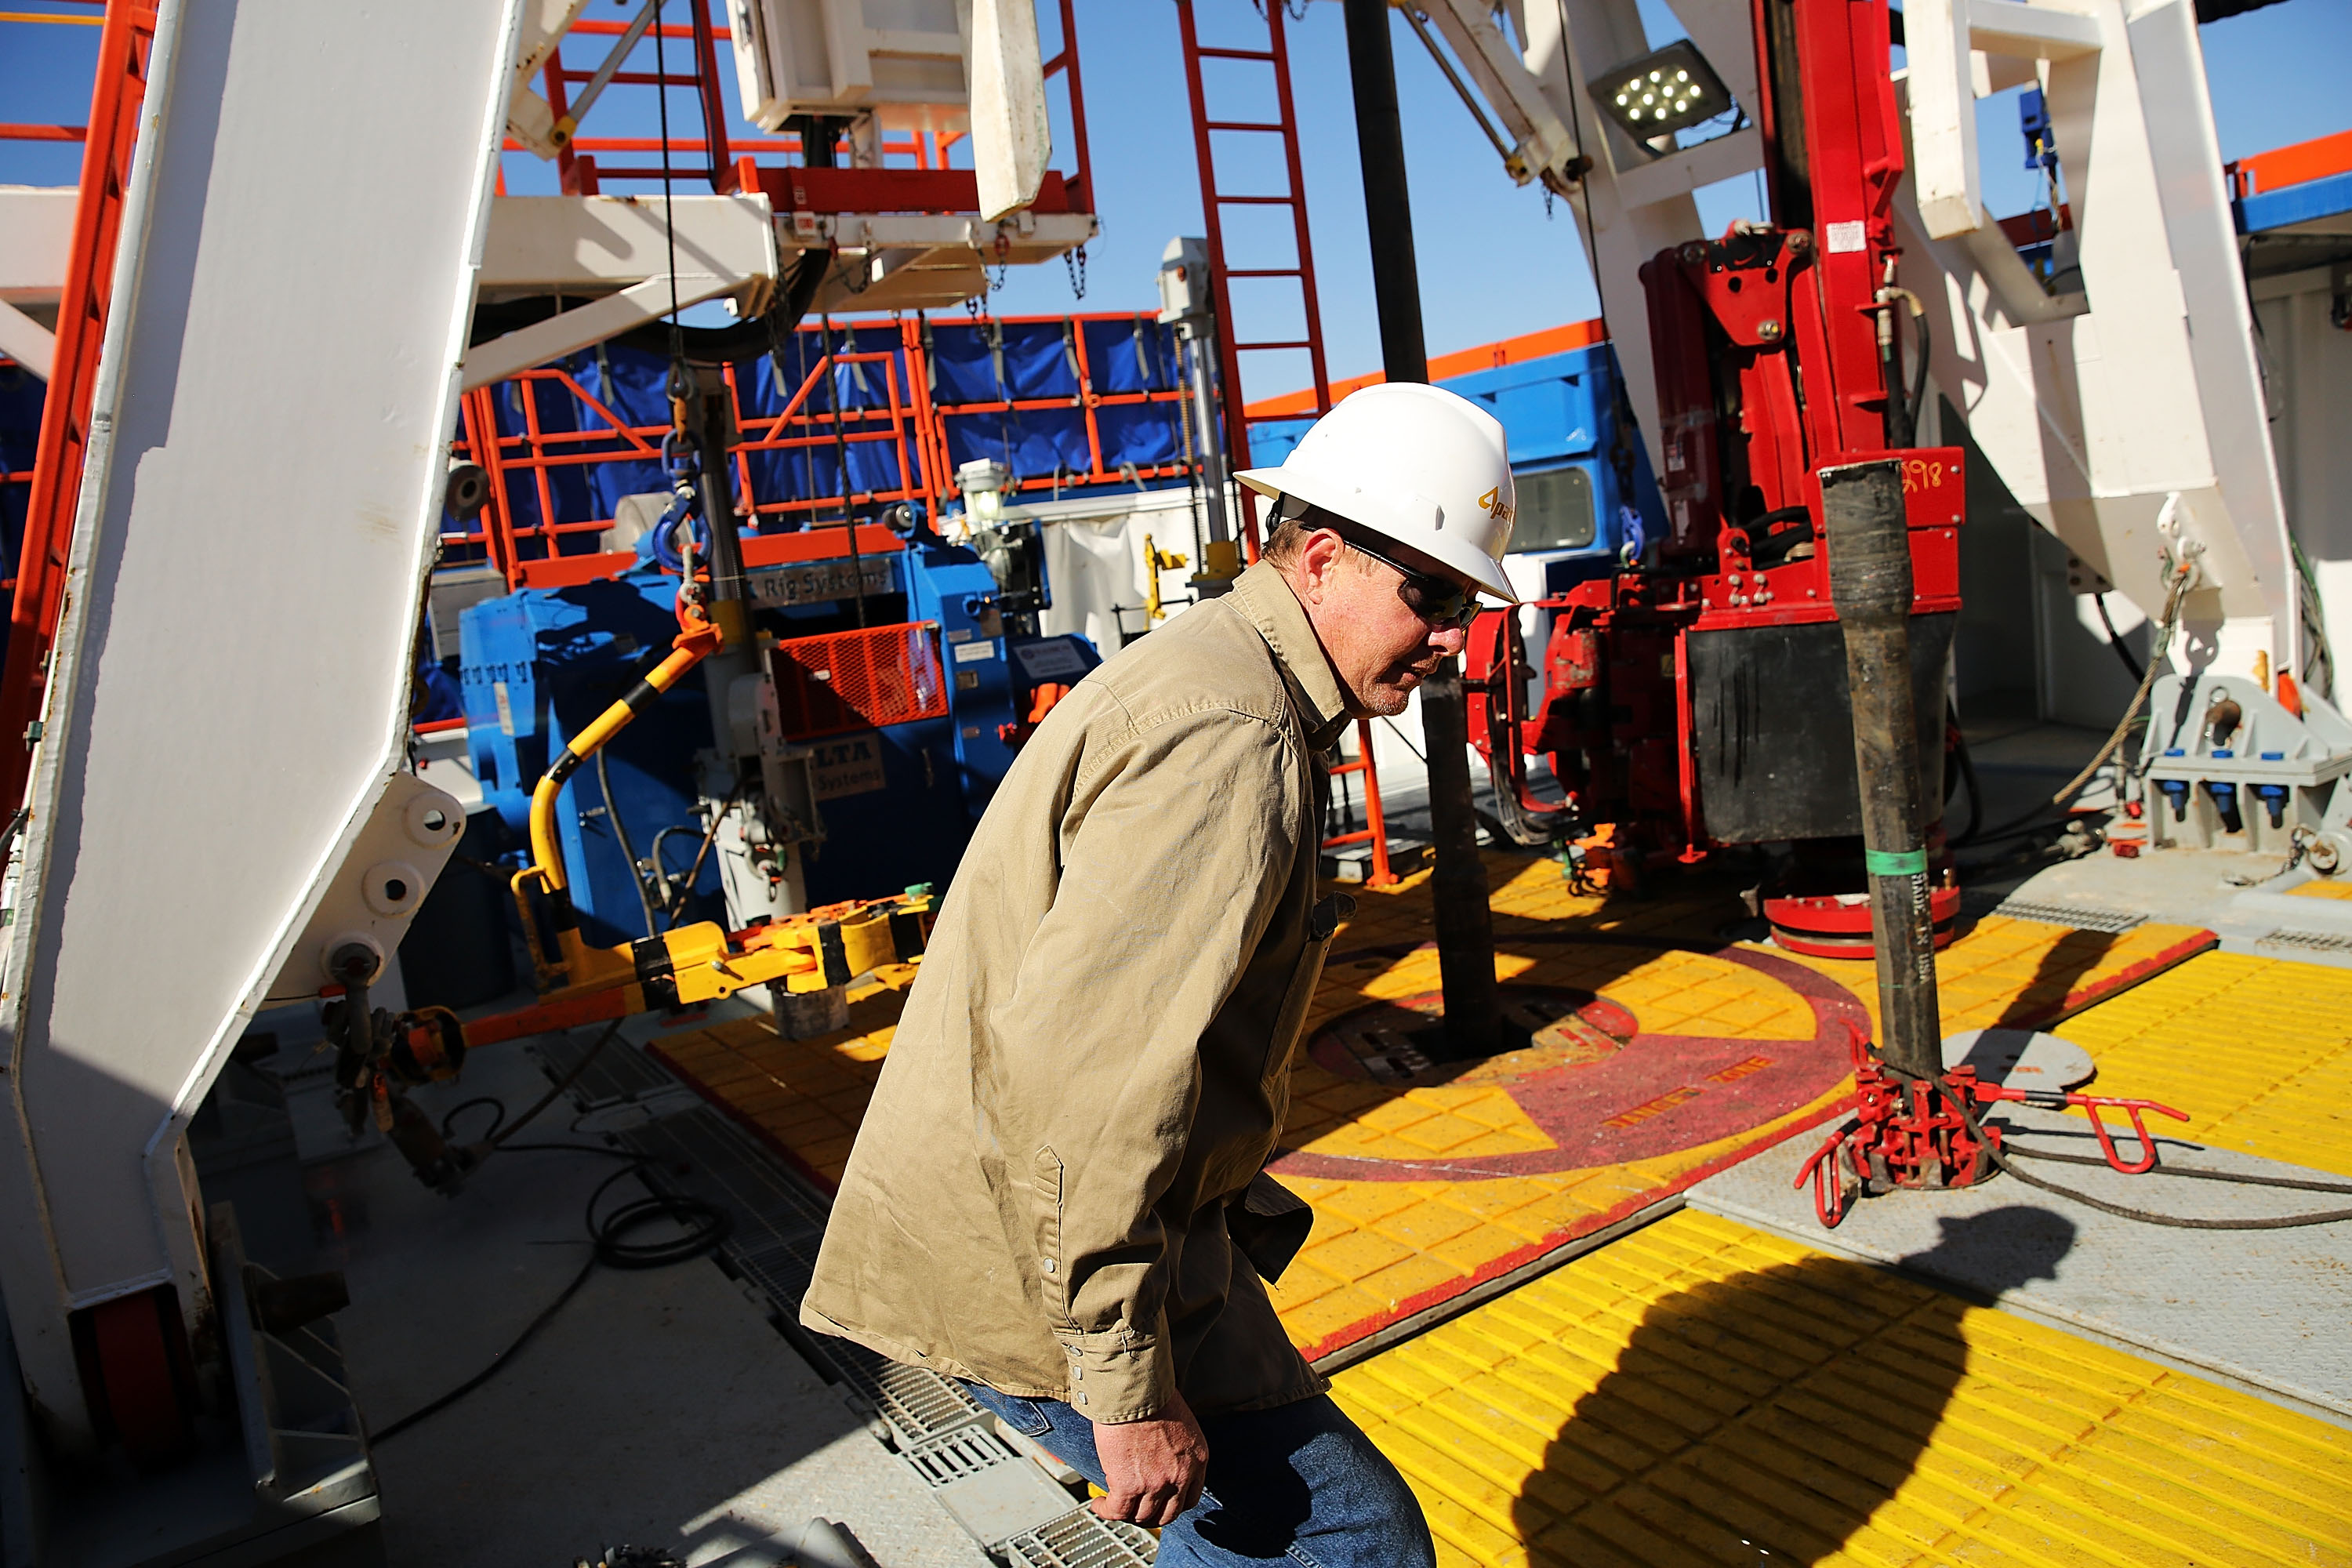 A worker with Apache Corp. is viewed at the Patterson 298 natural gas fueled drilling rig on land in the Permian Basin in 2015 in Mentone, Texas. (Spencer Platt/Getty Images)